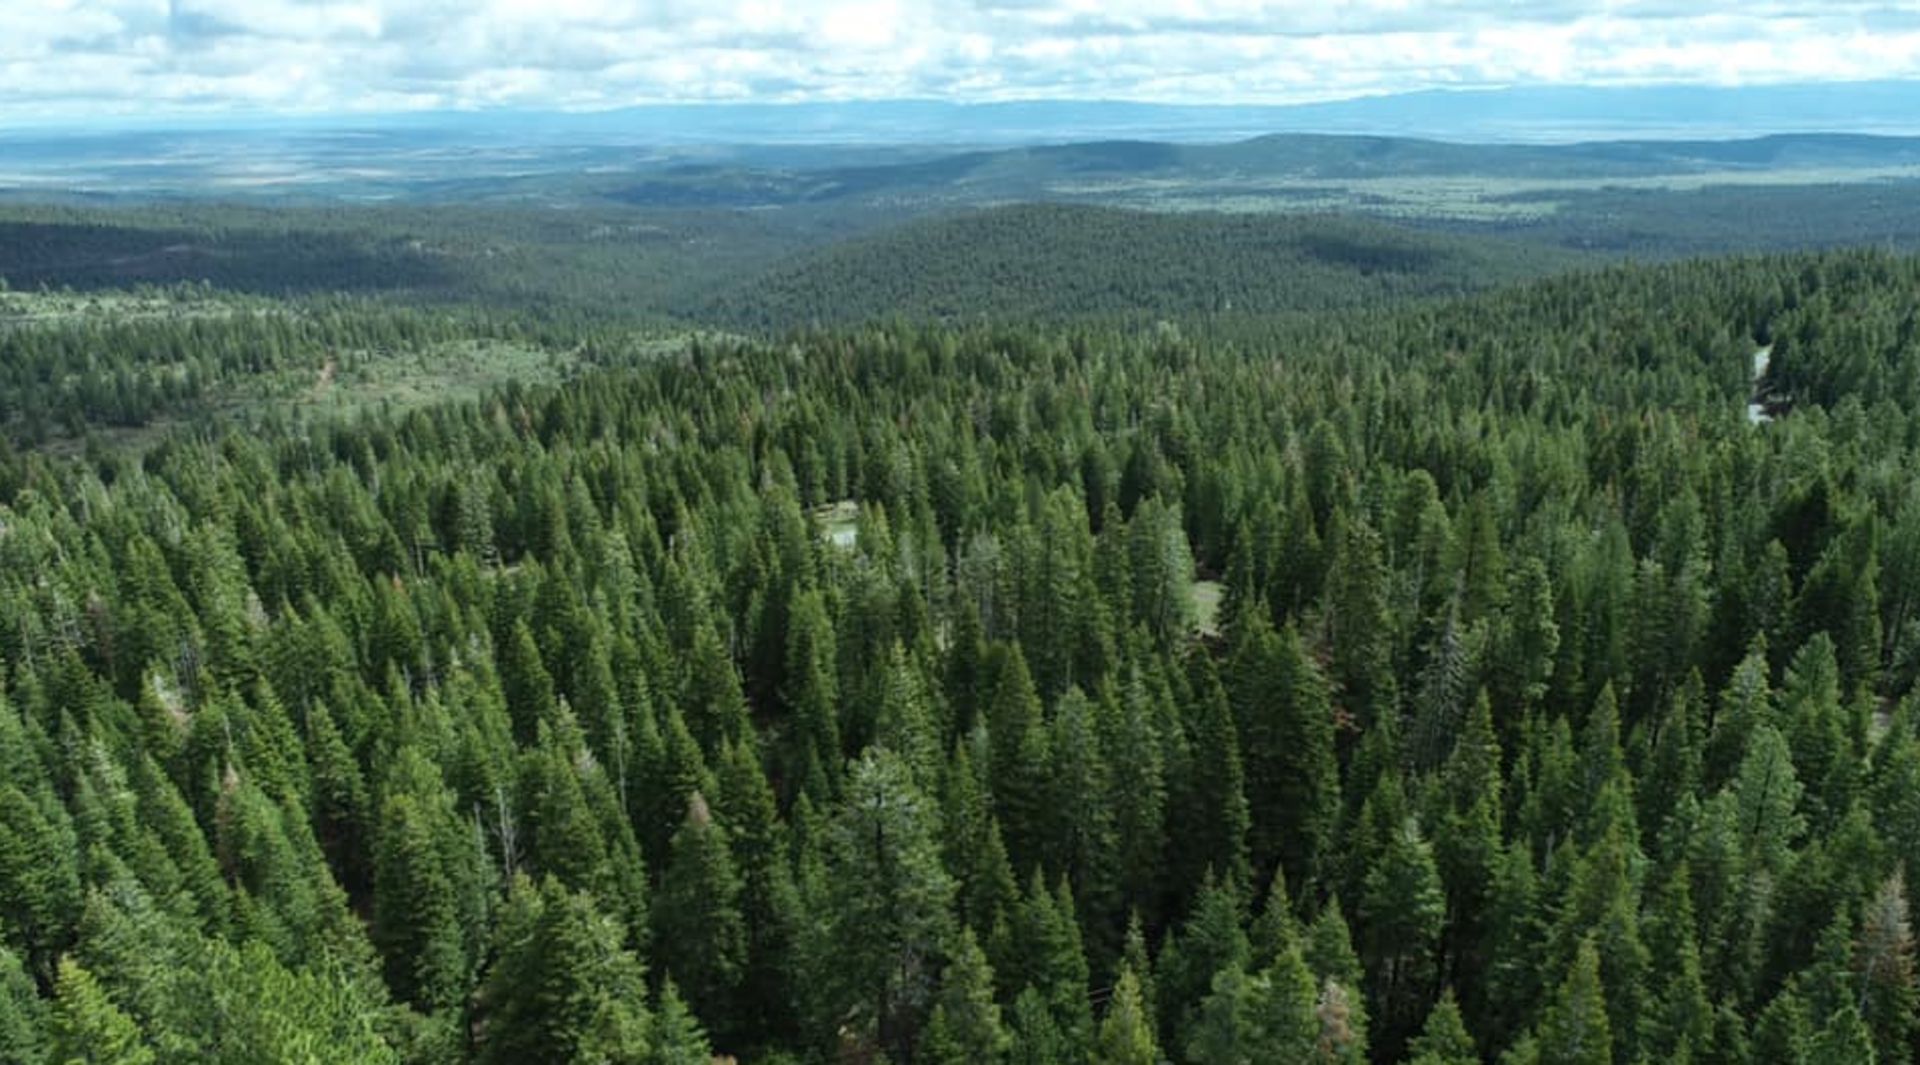 Build Your Sanctuary in the Peaceful Pine Woods of Modoc County, California! - Image 2 of 16